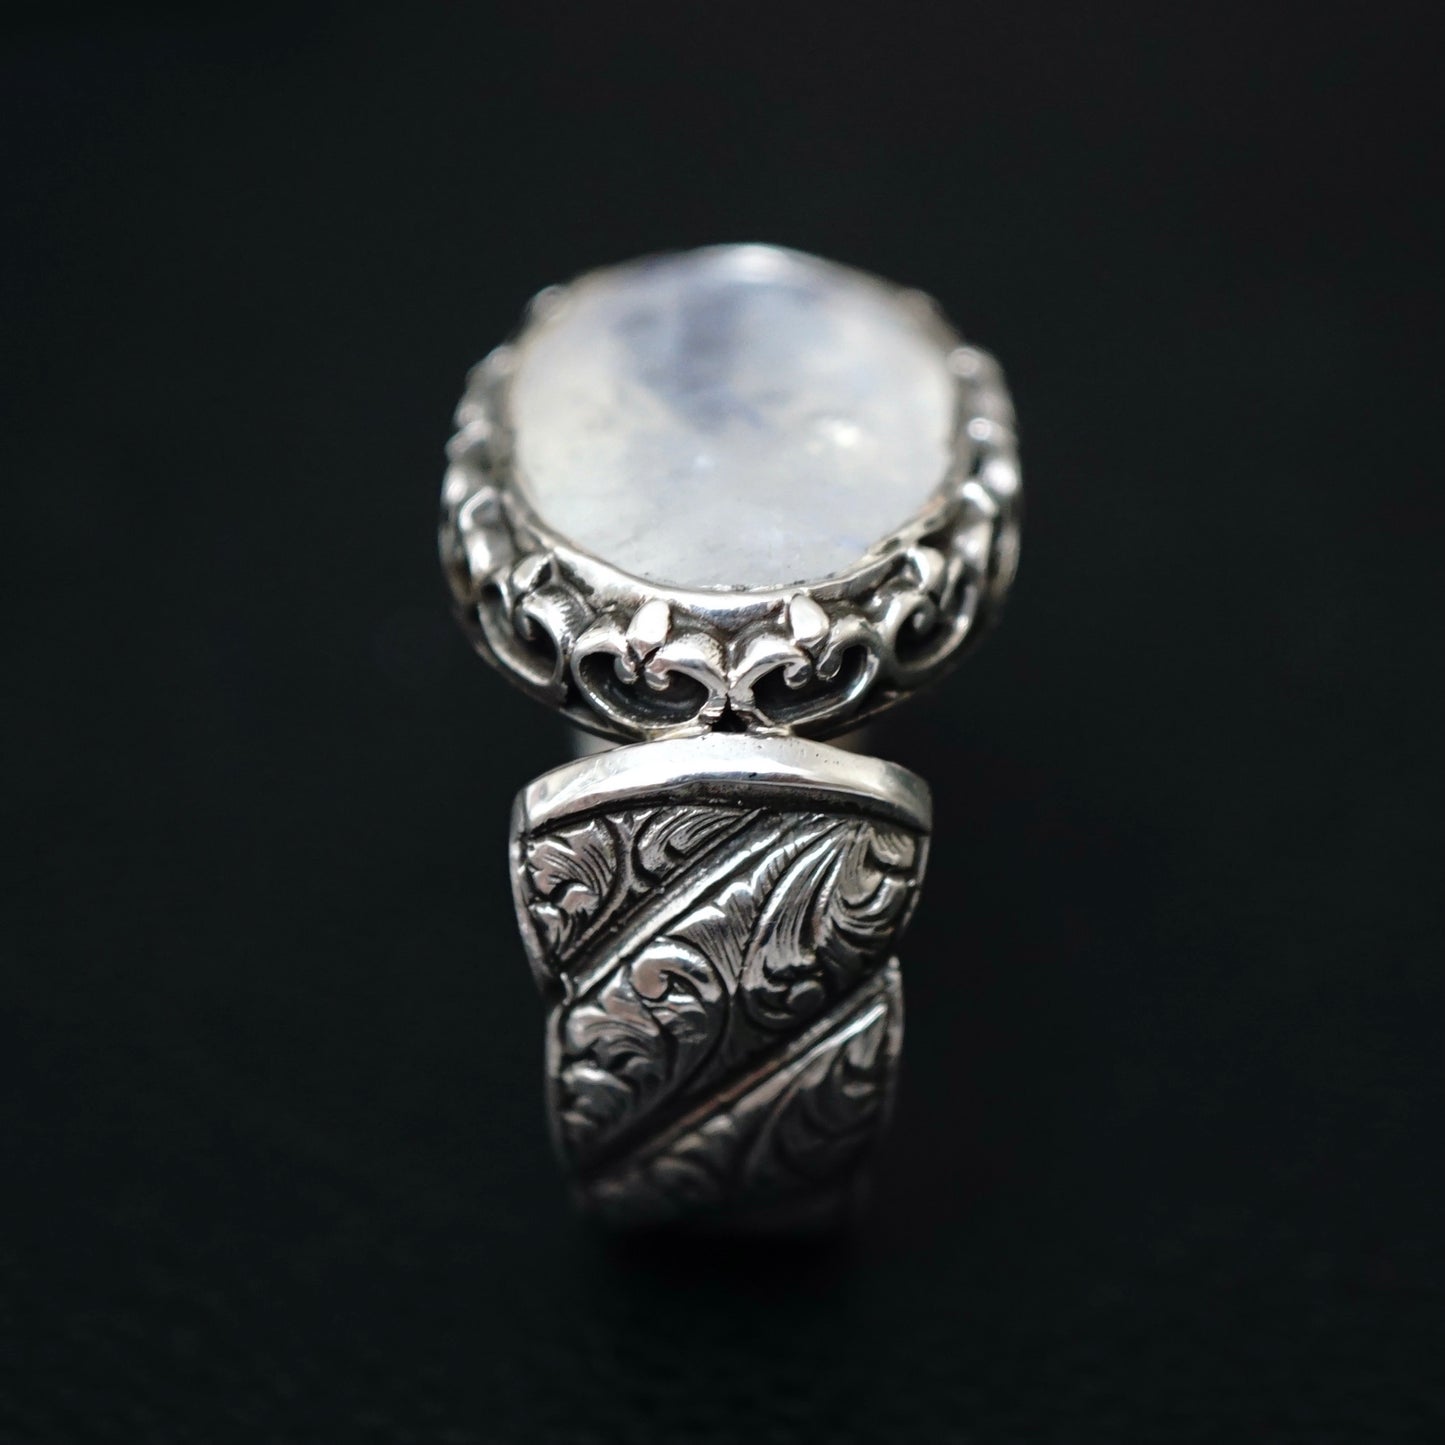 Moonstone Ring Sterling Silver Handmade Unique Men's Jewelry natural selected gemstone size 10